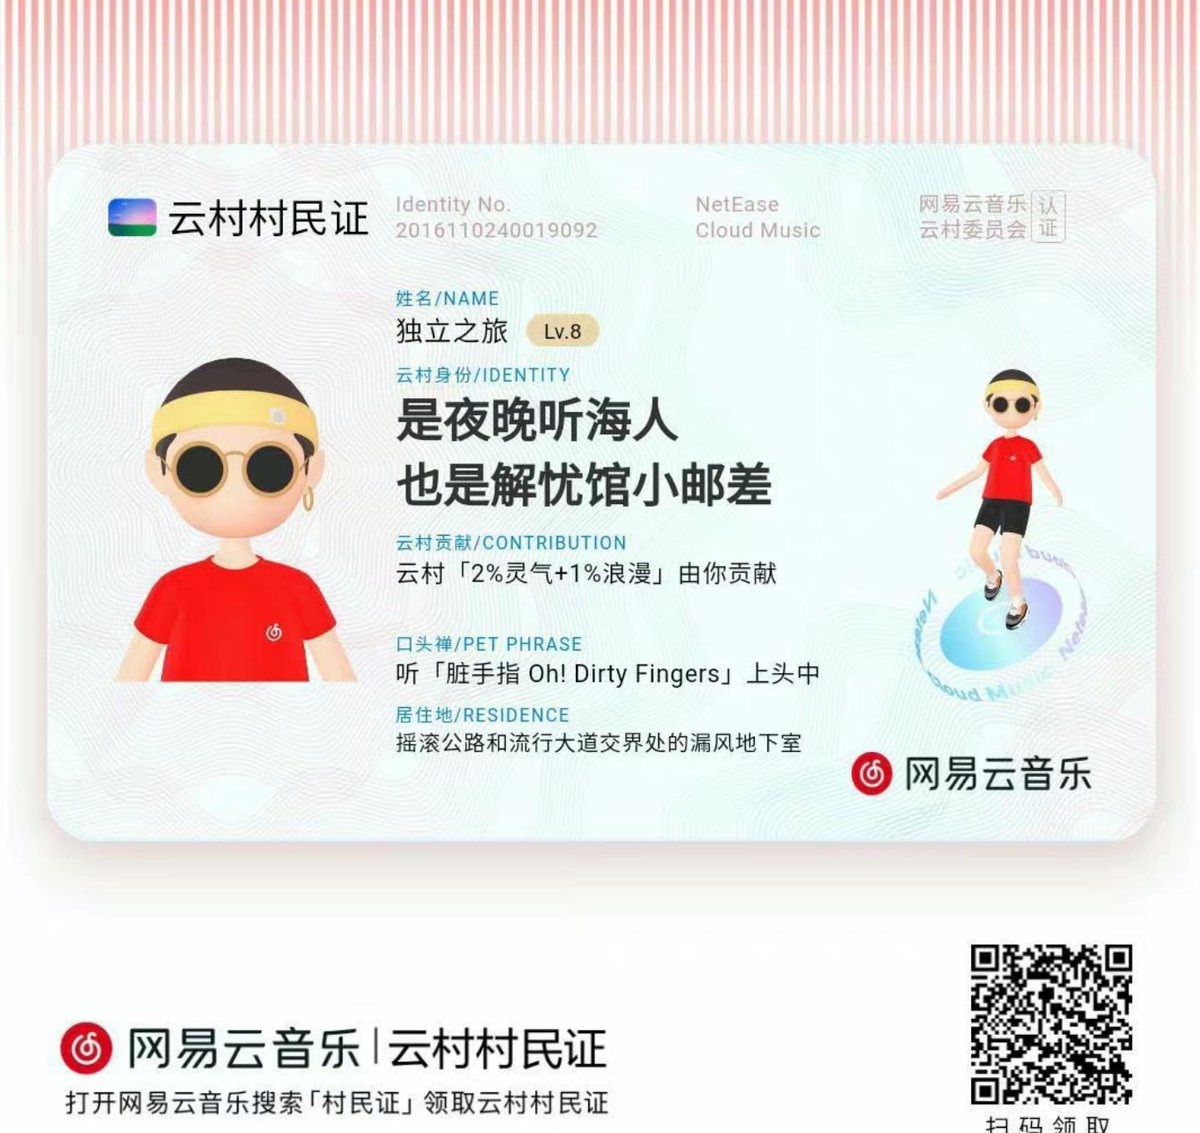 Bryan Grogan Netease Music Id Cards Trending Not Mine But Residence Says Rock N Roll Highway And Pop Blvd Boundary Dwelling In A Leaky Underground Room Like Something You Might